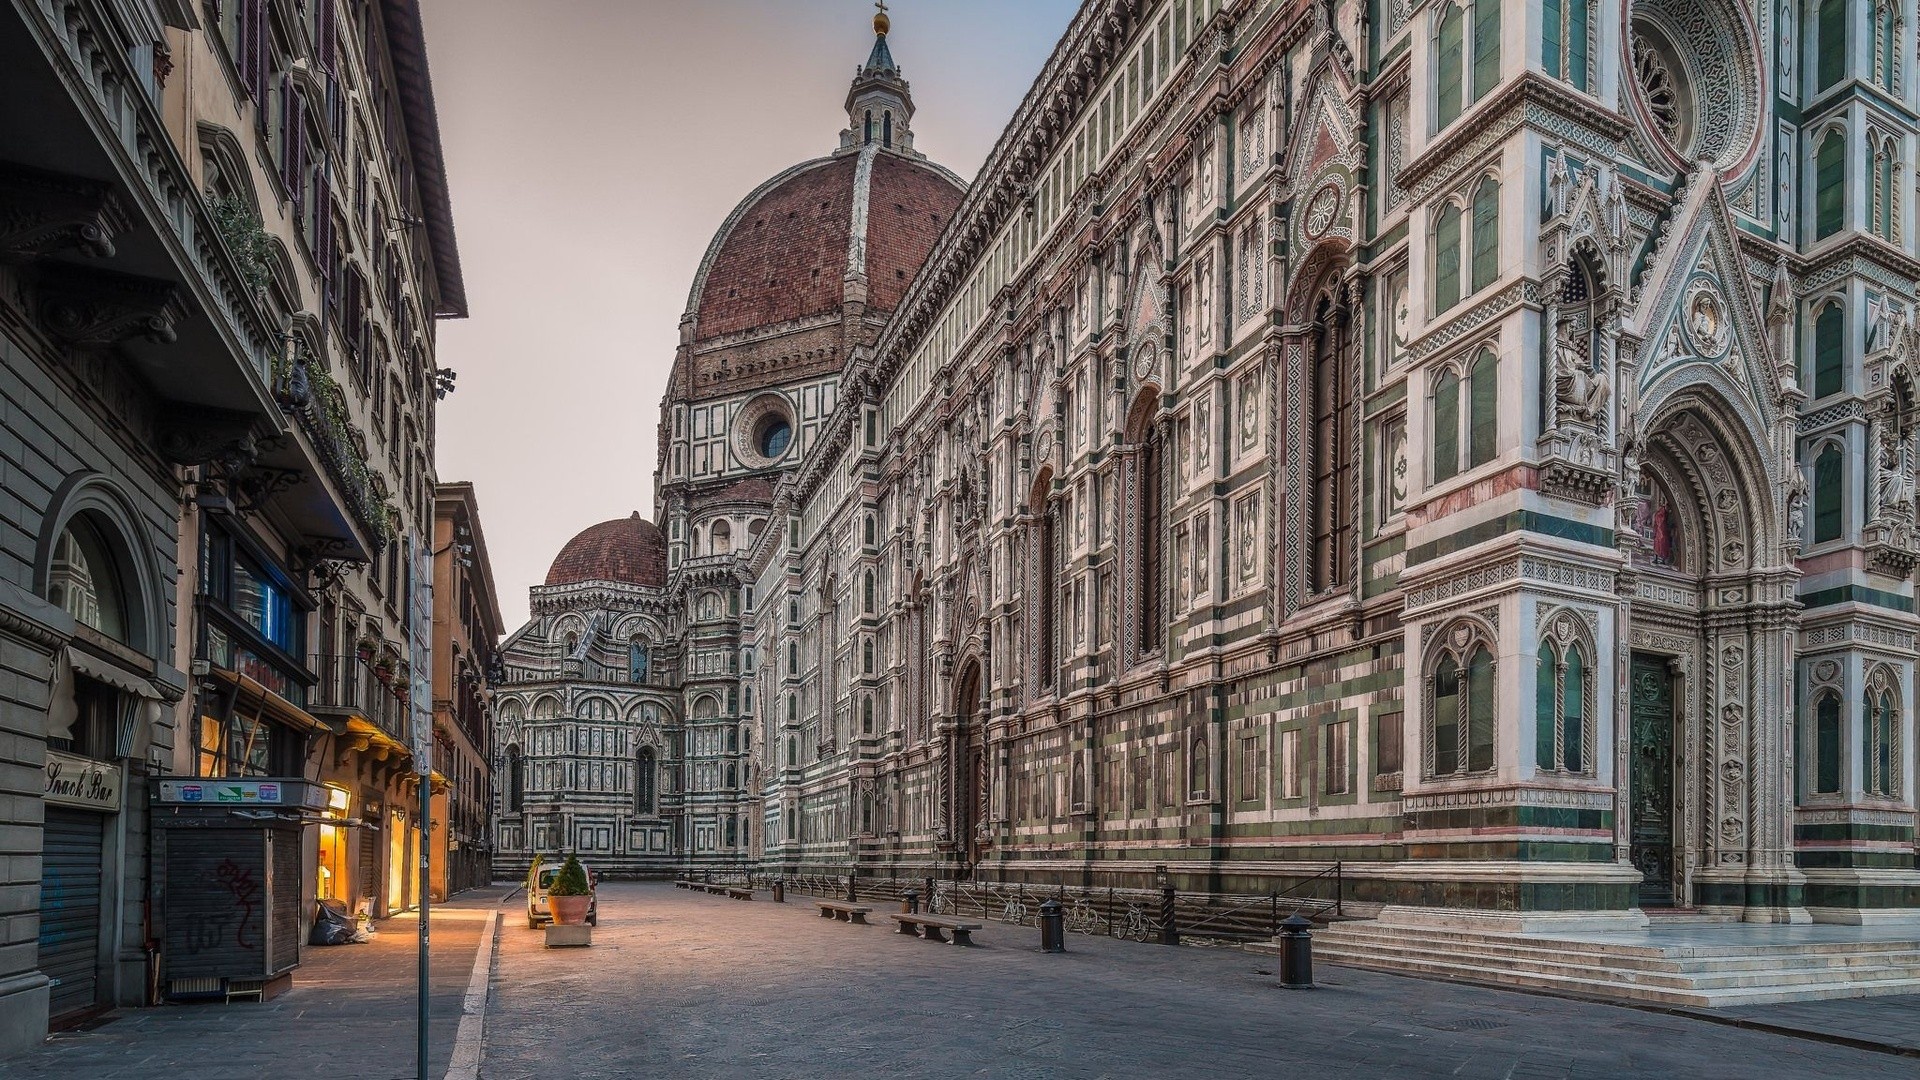 florence, italy, religious, florence cathedral, architecture, building, city, man made, cathedrals Image for desktop